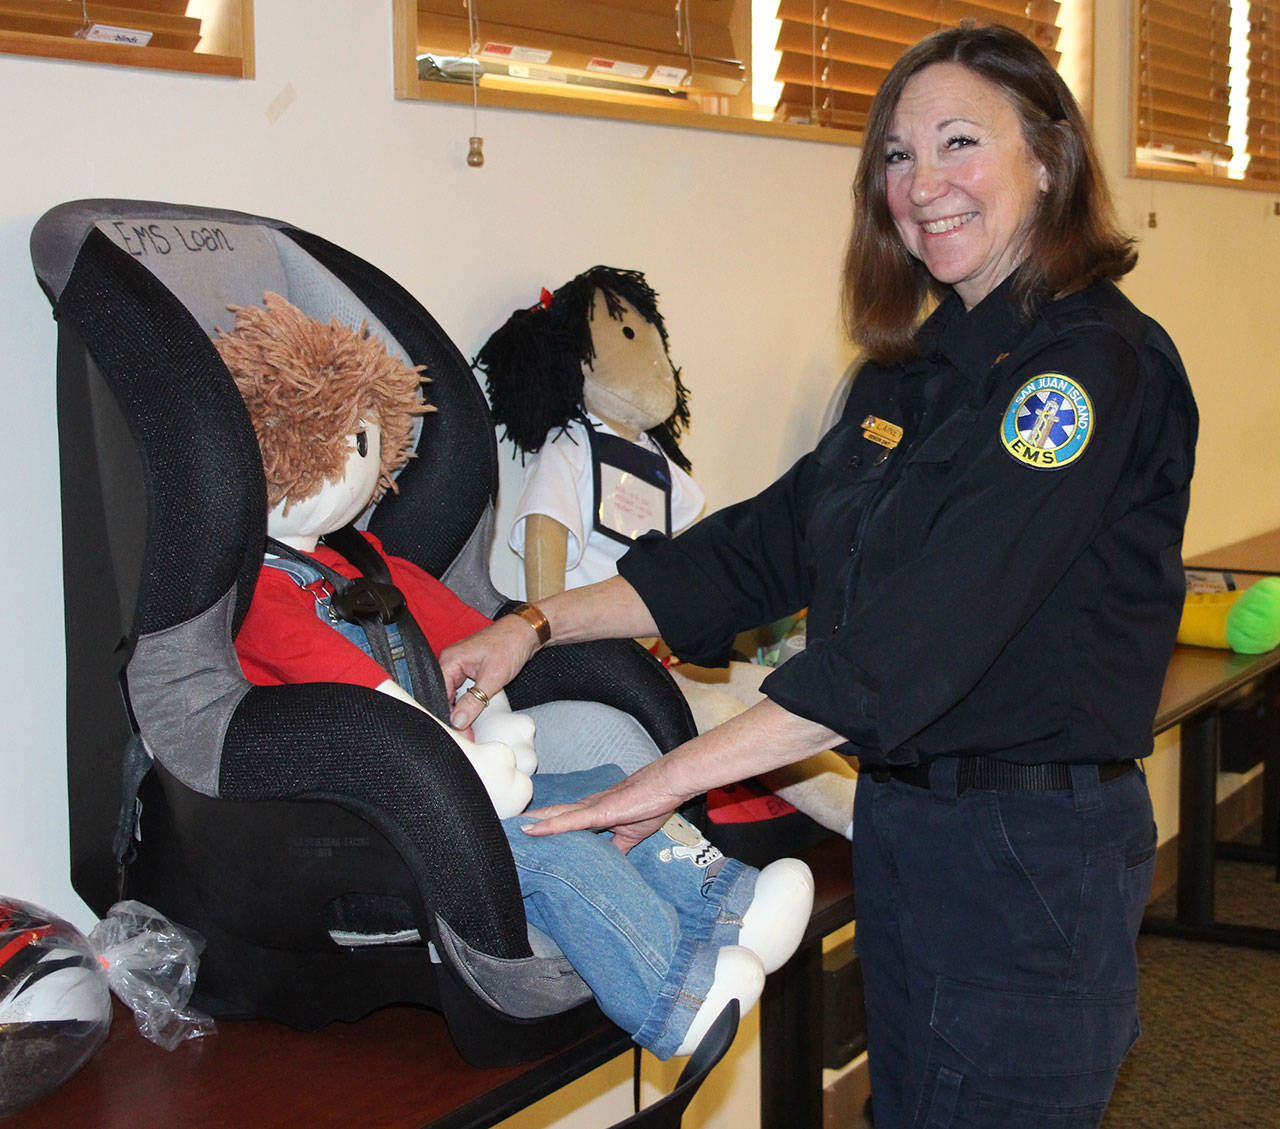 Staff photo/Hayley Day                                Lainey Volk, a director at San Juan Island EMS, demonstrates how to secure a child into a car seat.